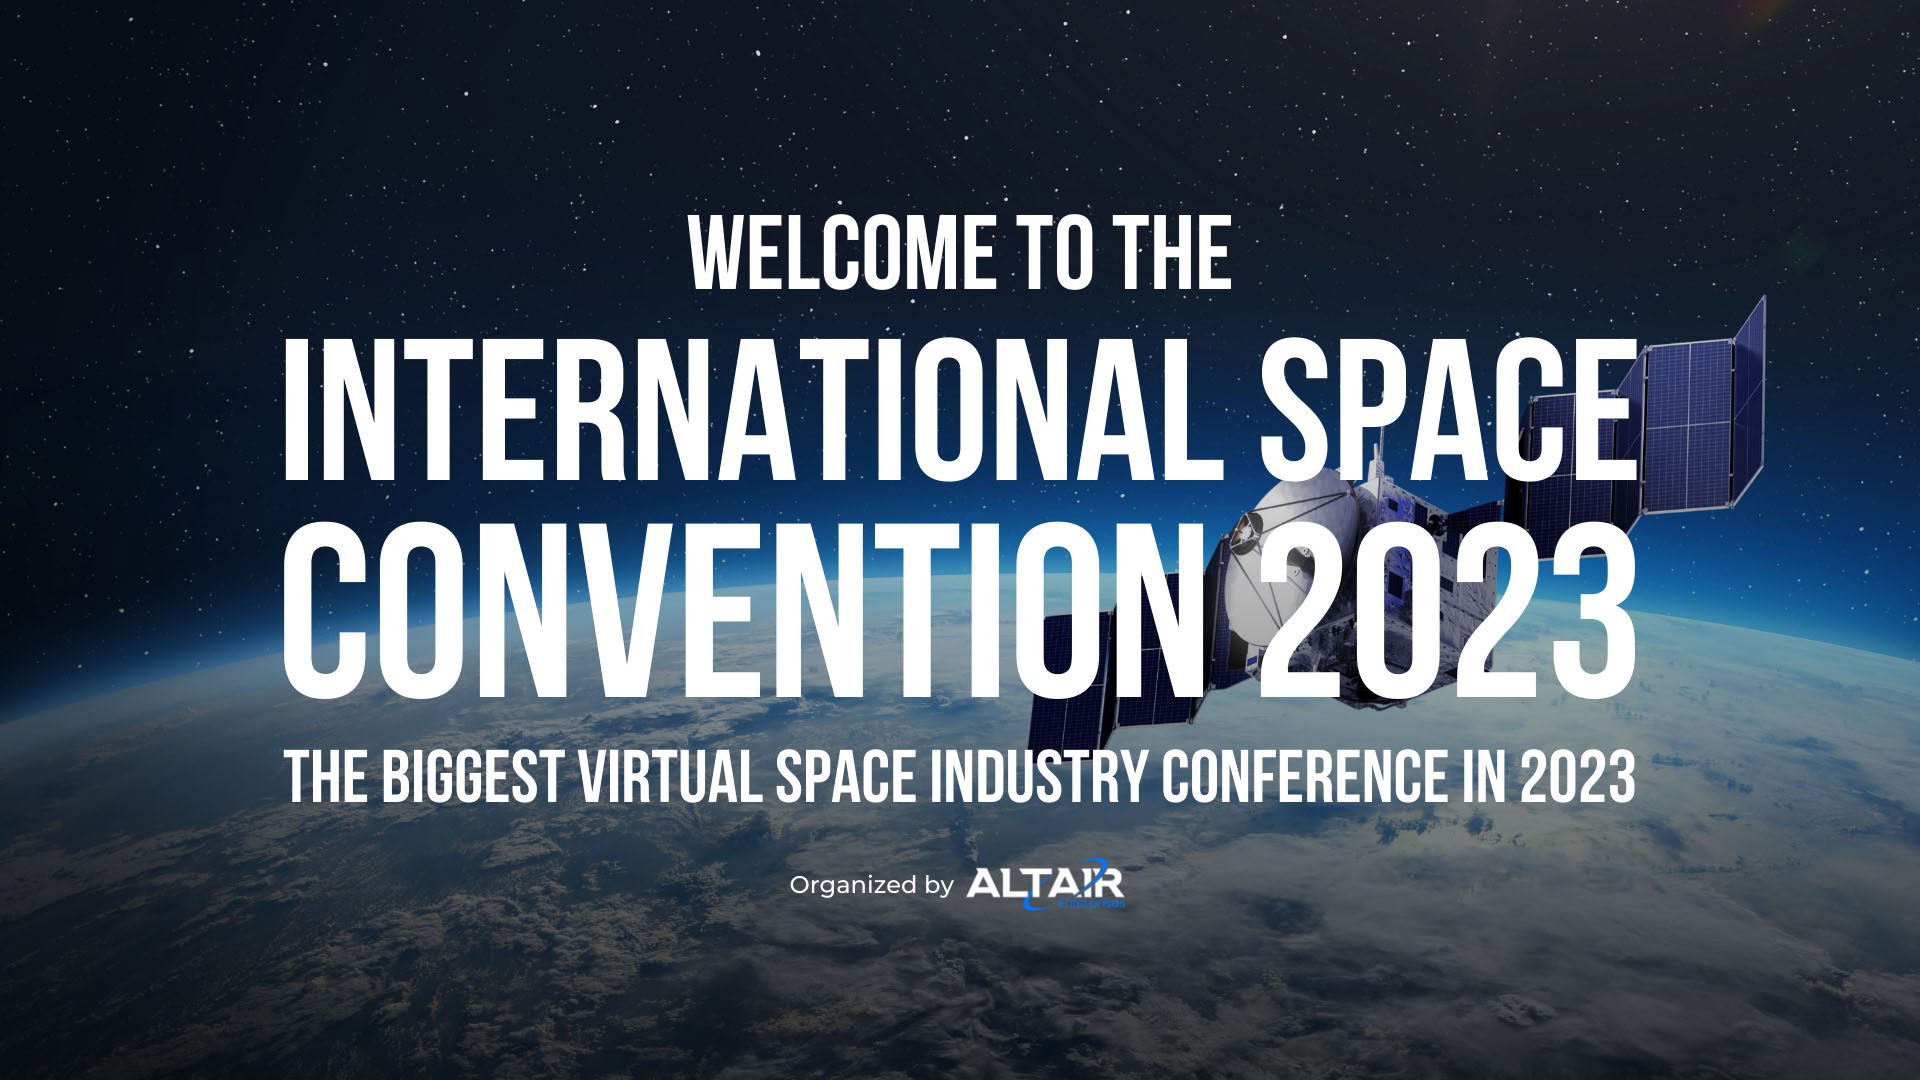 International Space Convention 2023 poster